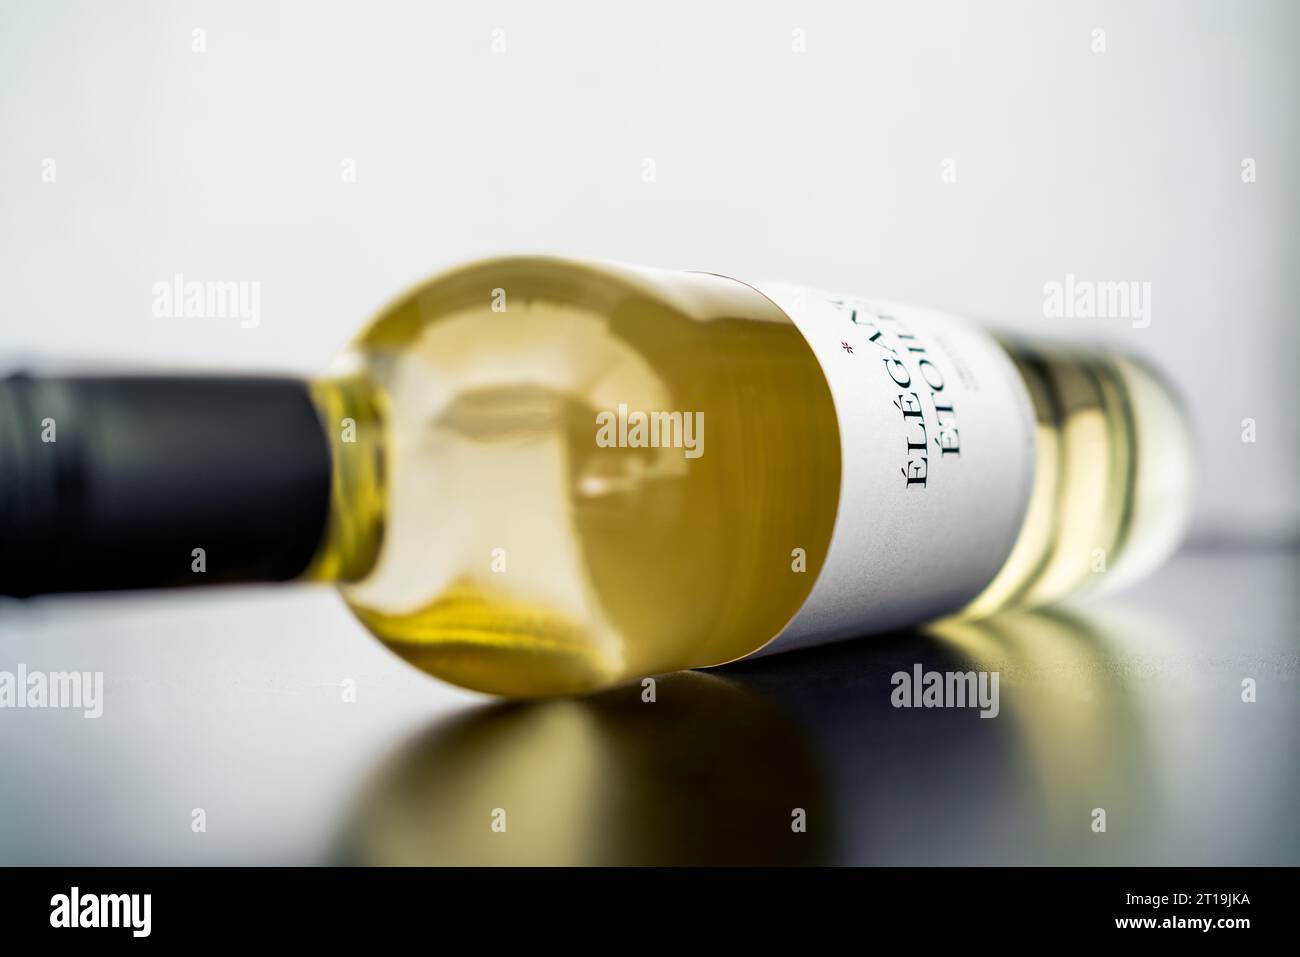 White wine bottle with label and mockup brand. Chardonnay, sauvignon blanc or riesling on table. Vintage alcohol. Premium quality product. Stock Photo